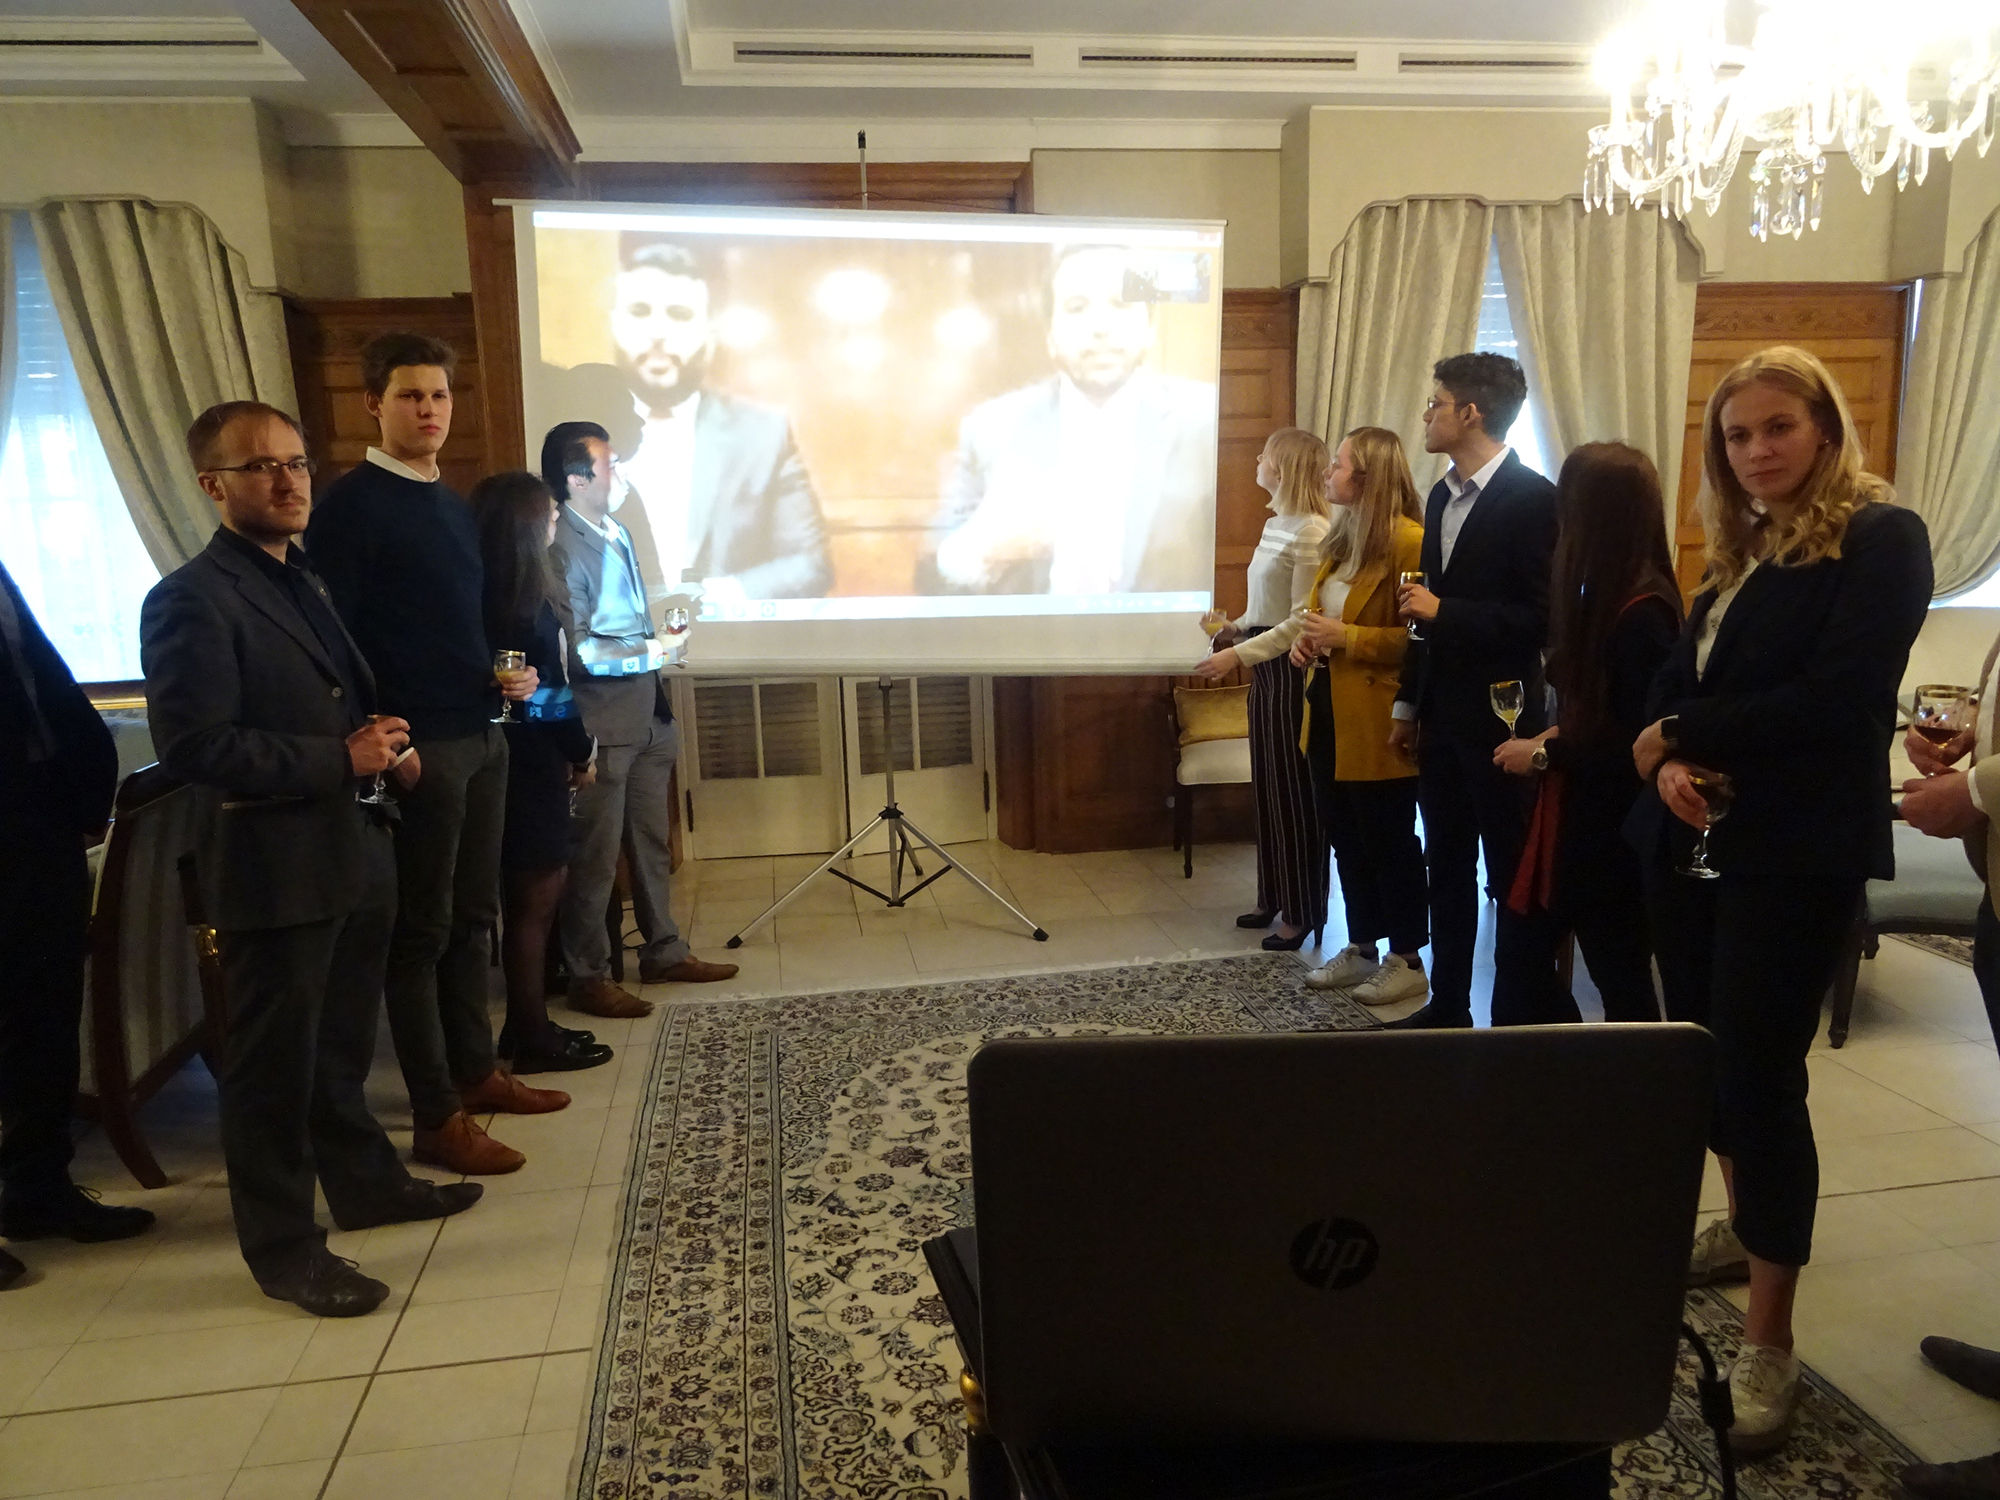 The Belgian students watched a video of Kuwait's representation in the UN